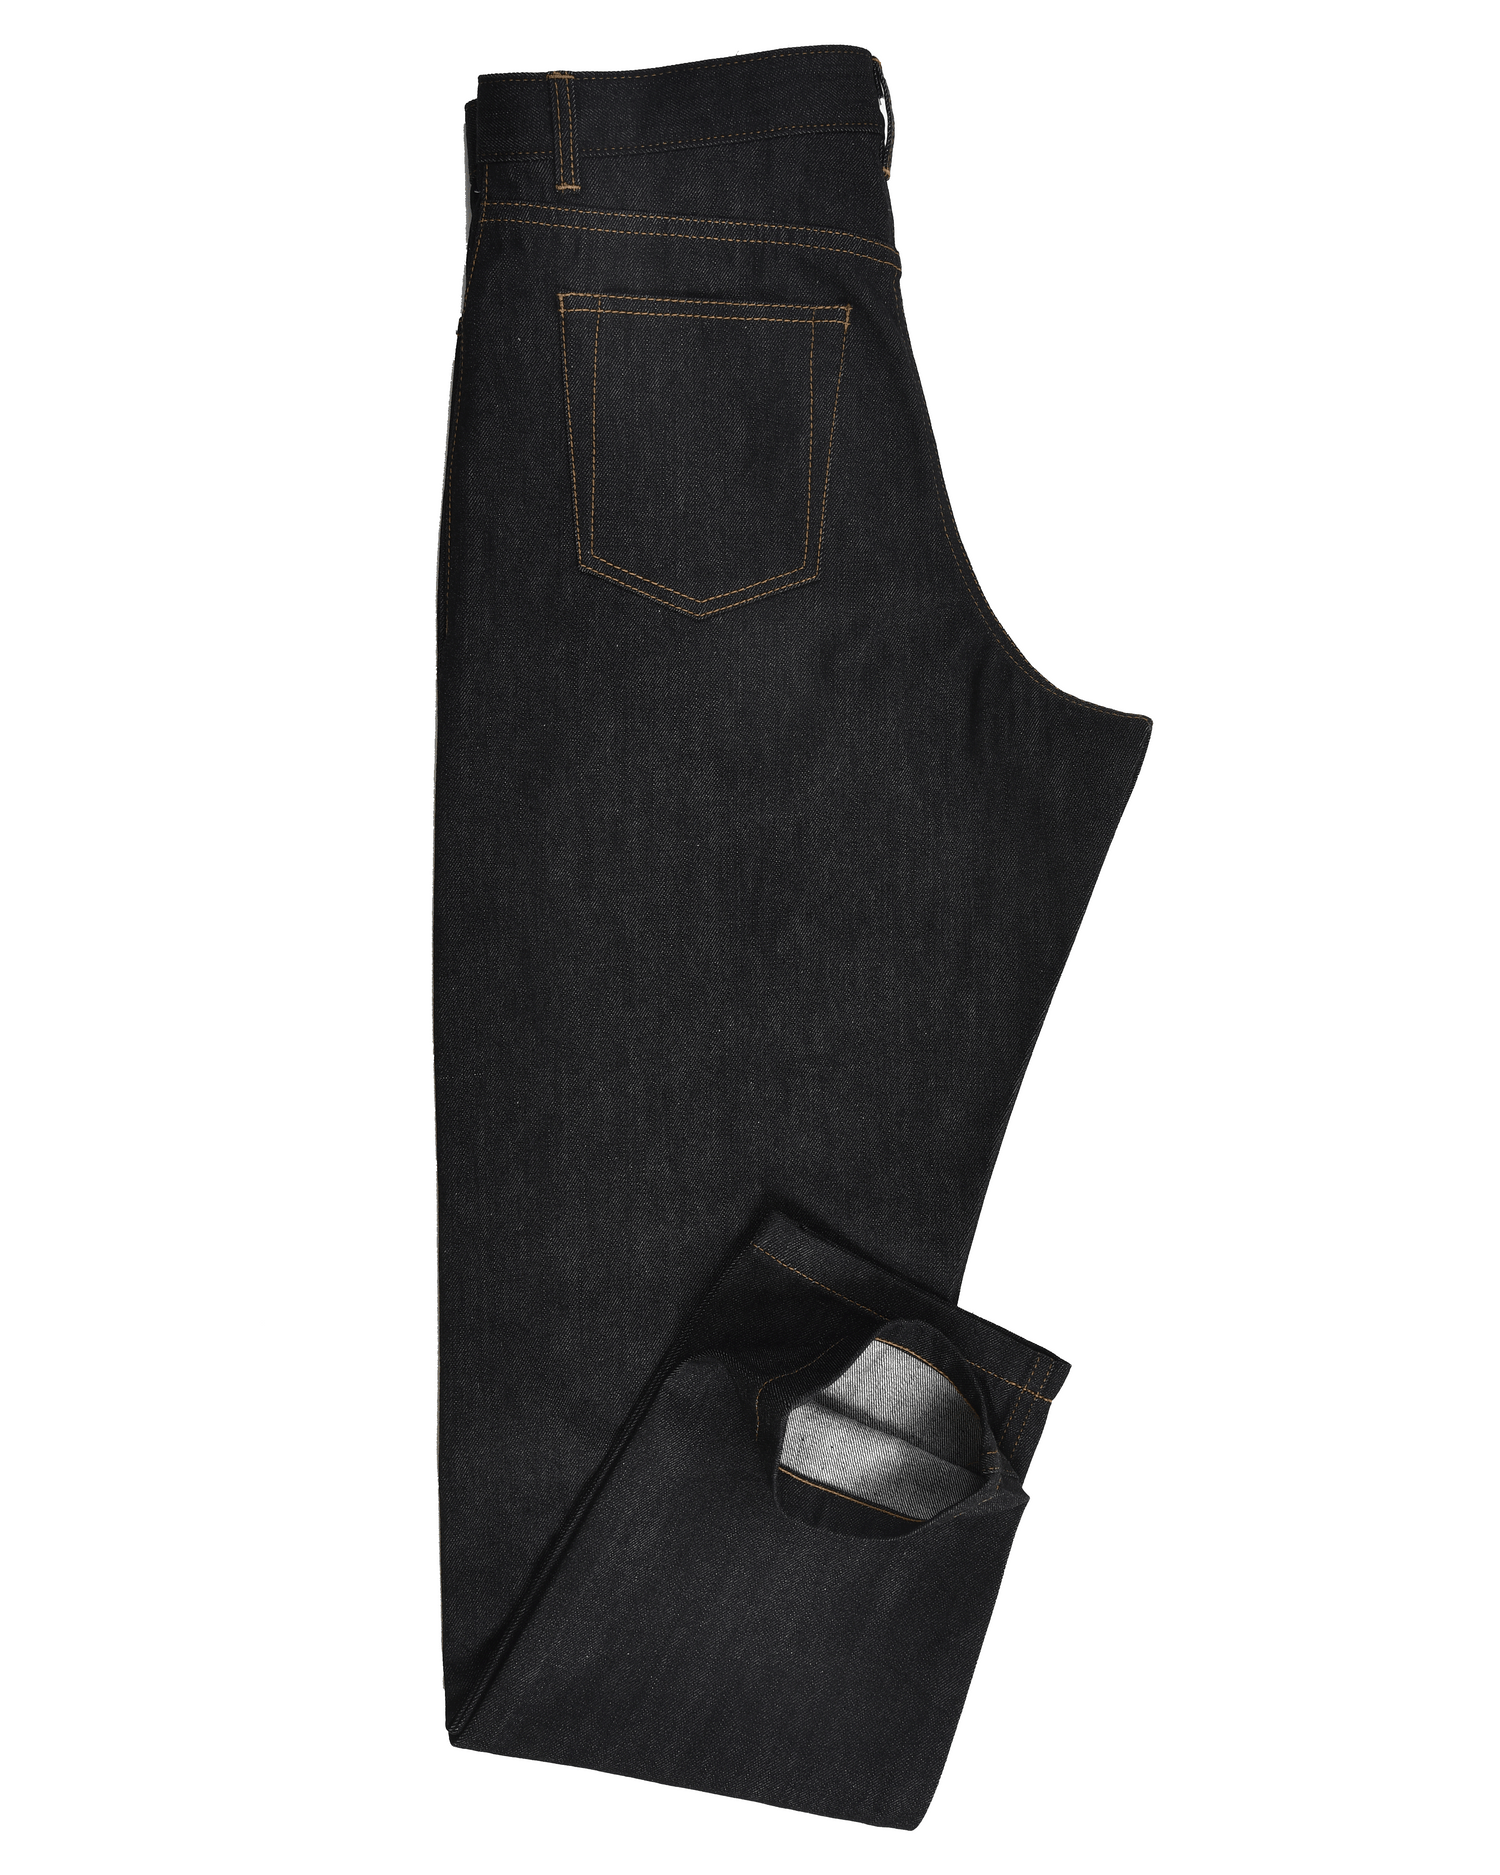 Side view of mens jeans by Luxire in midnight grey